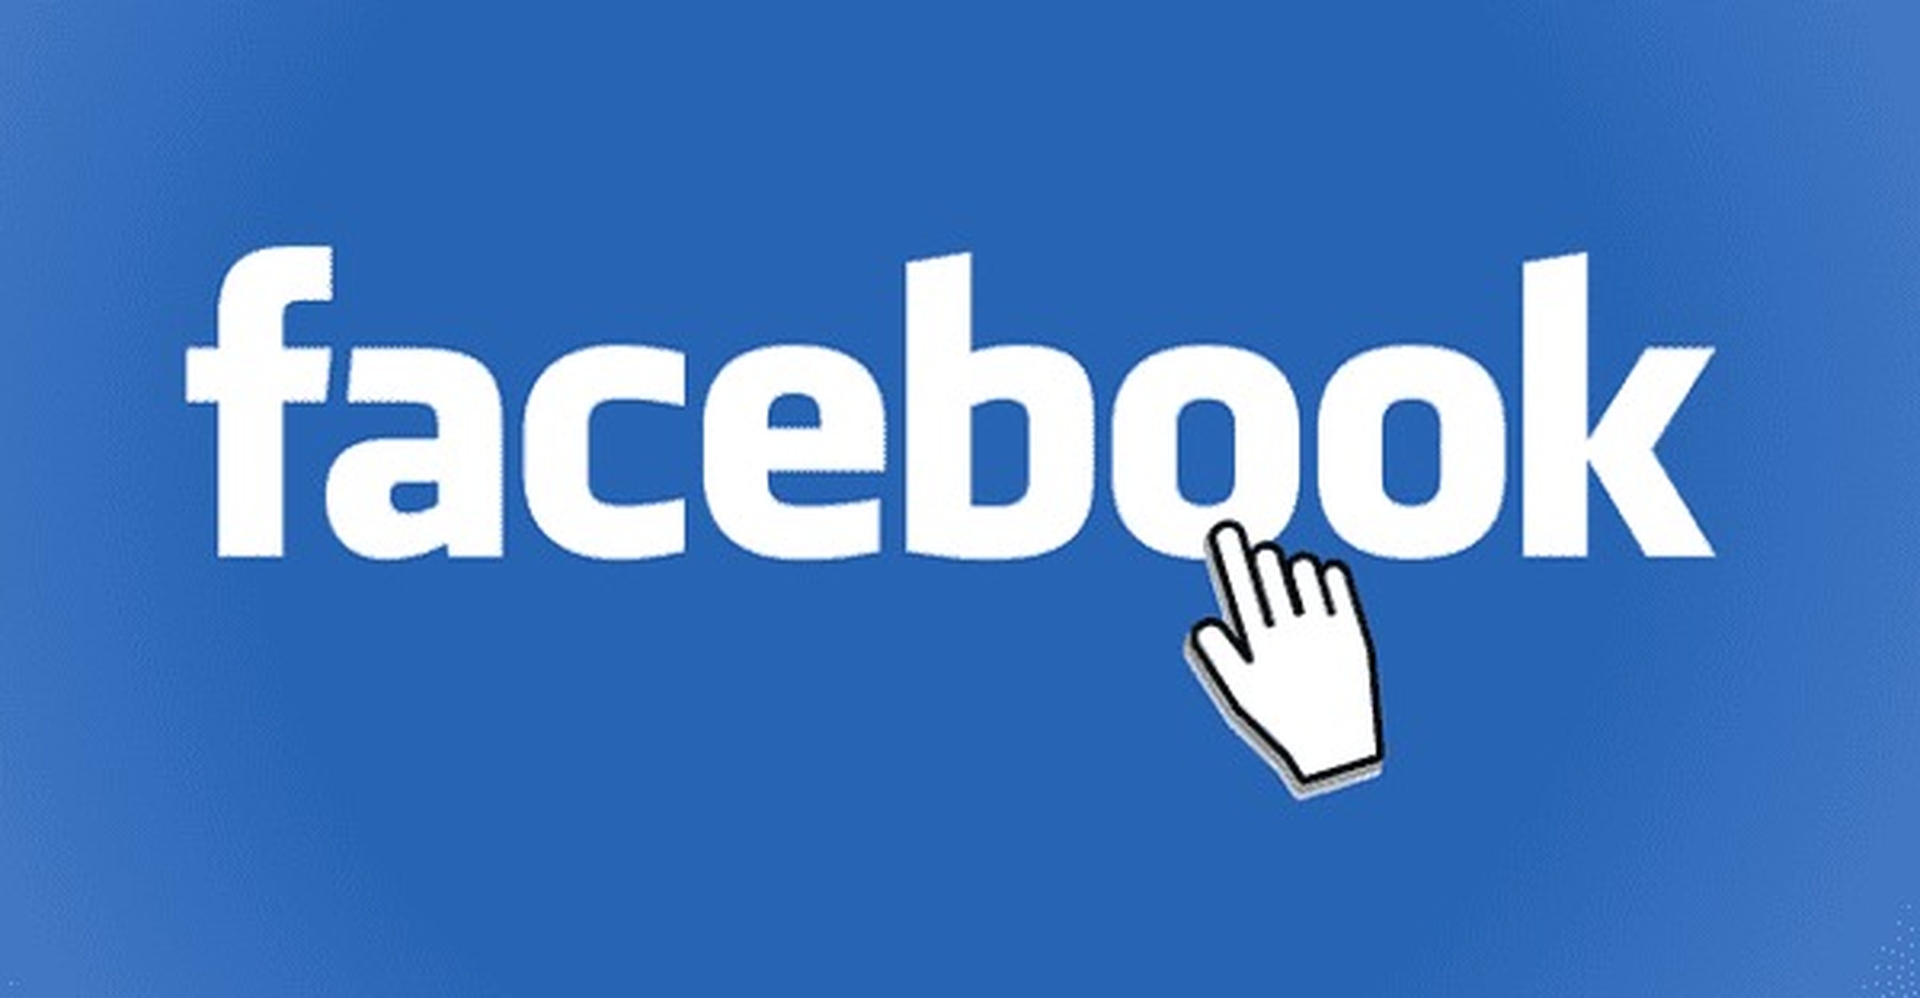 Today, we are going to cover how to fix No data available Facebook error, by teaching you how to clear cache in Facebook and other alternative methods.